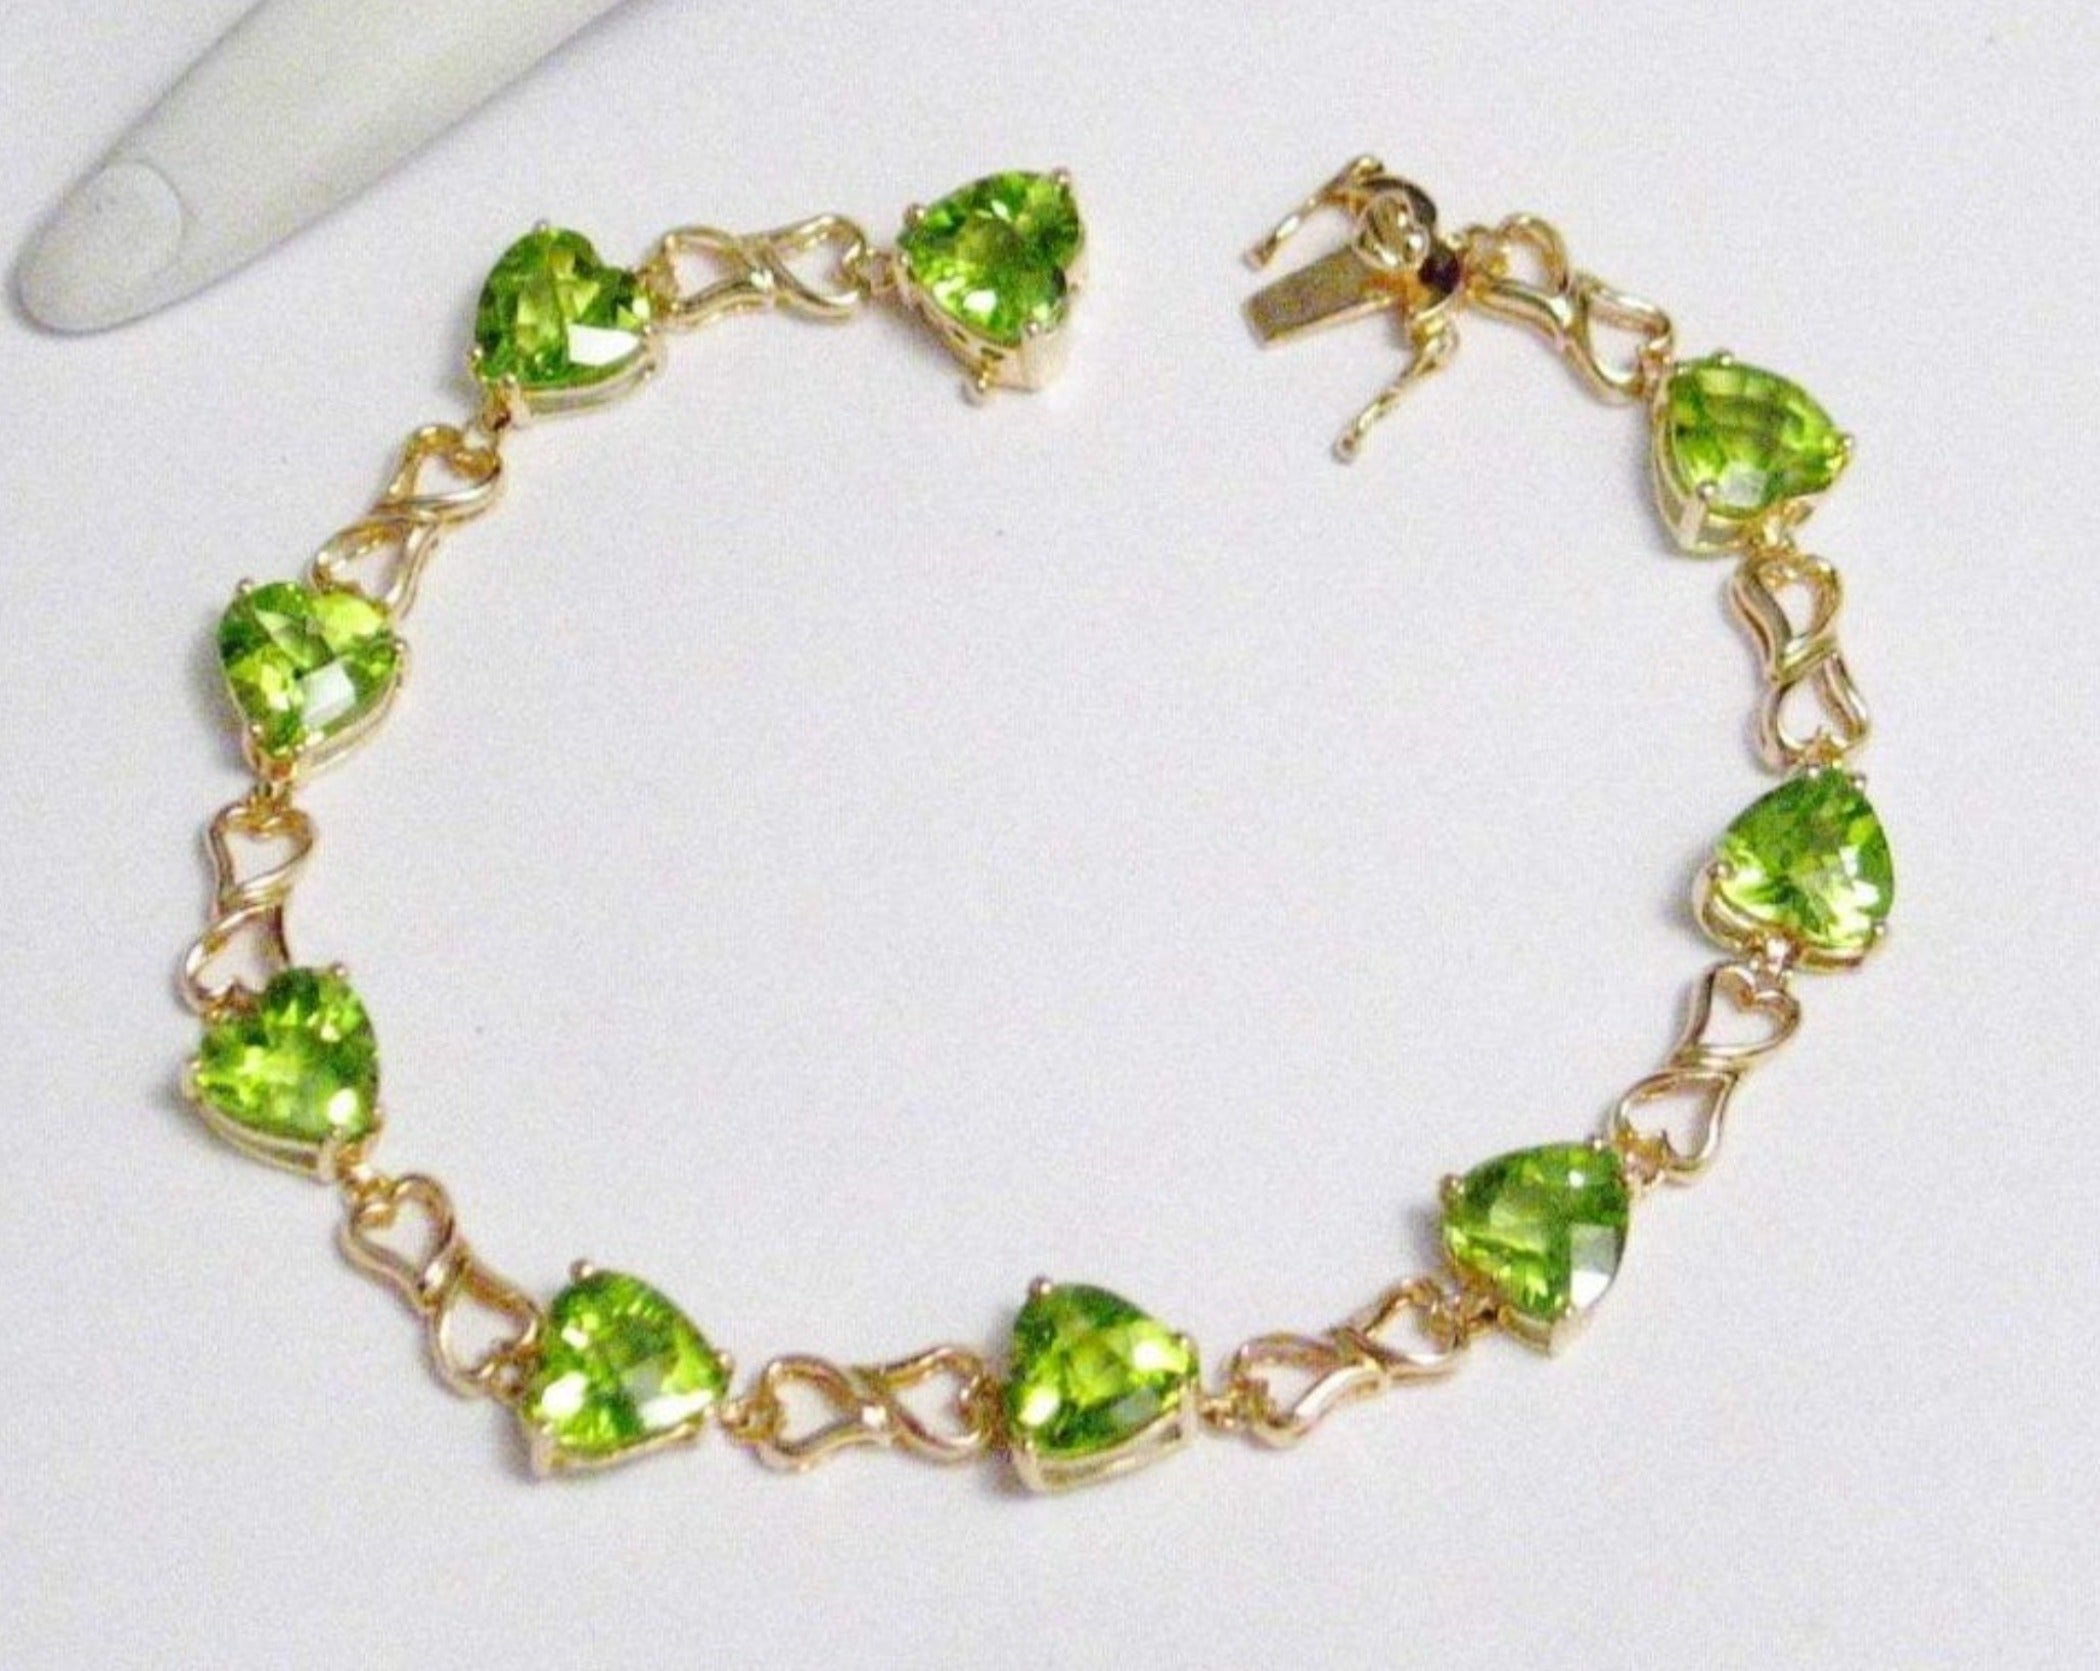 Morchic 3mm Green Peridot Gemstone Faceted Beads Womens Strand Bracelet,  Easy Adjustable 7-9 Inch Birthday Gift